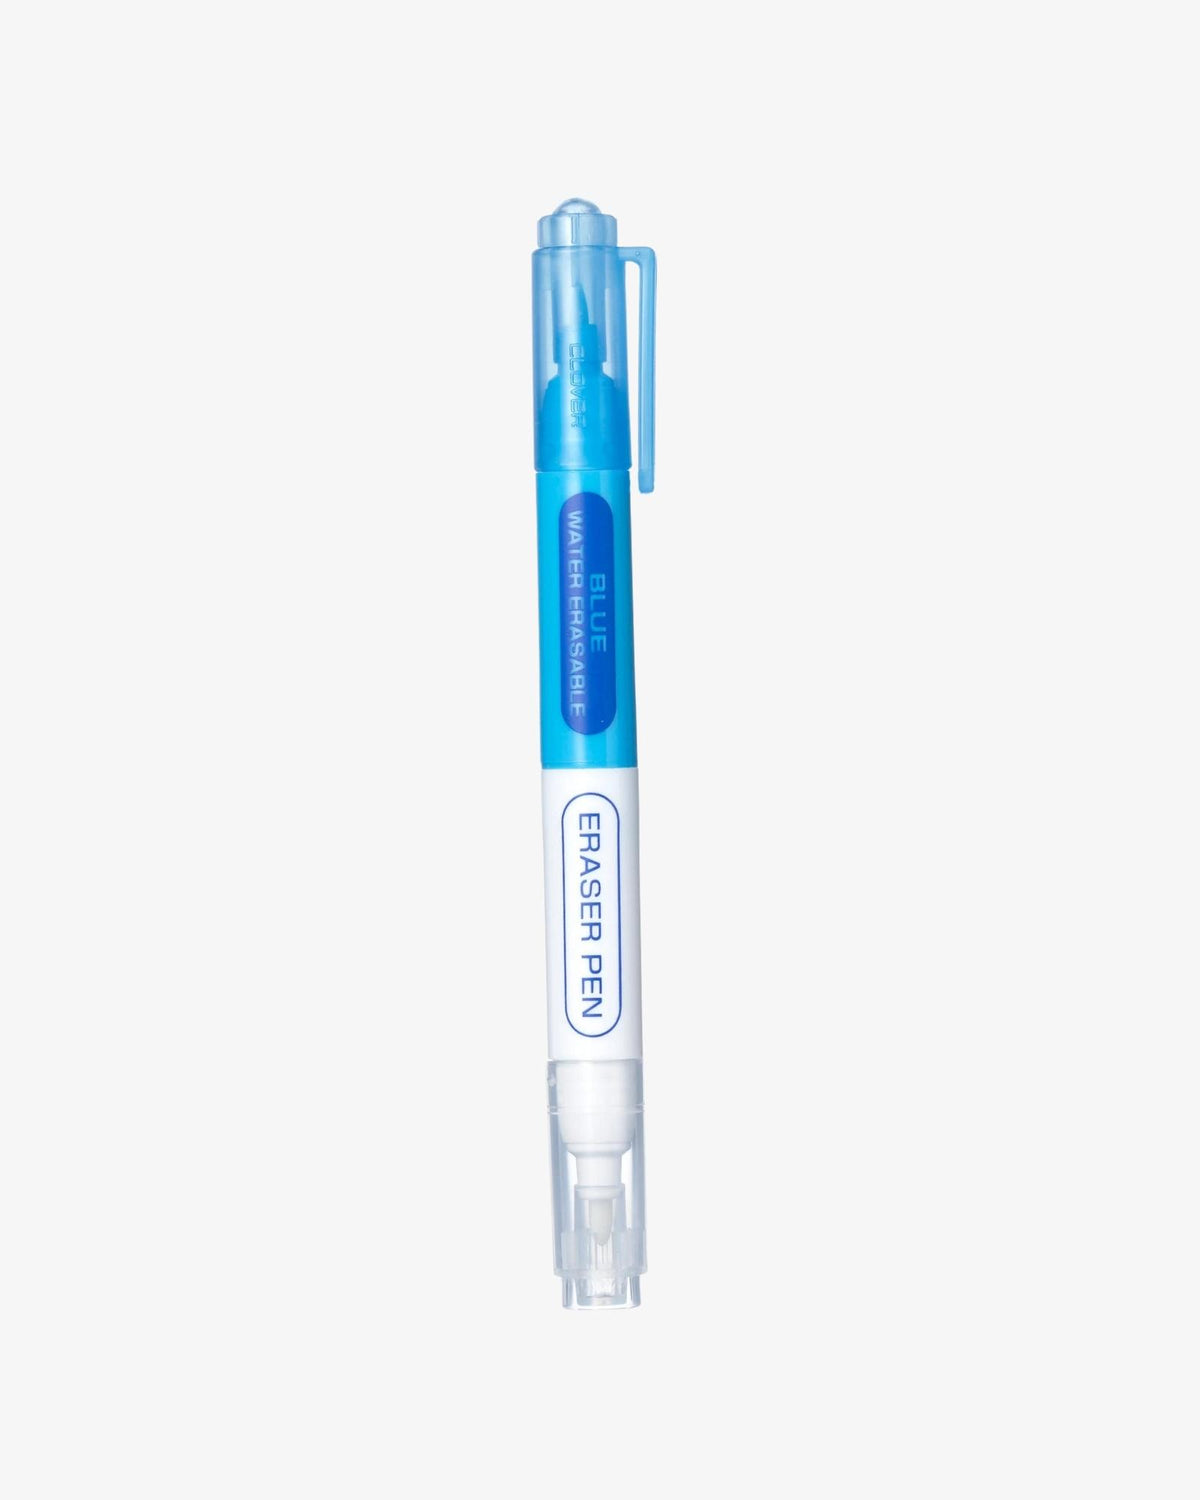 Water Soluble Embroidery Marker by Clover